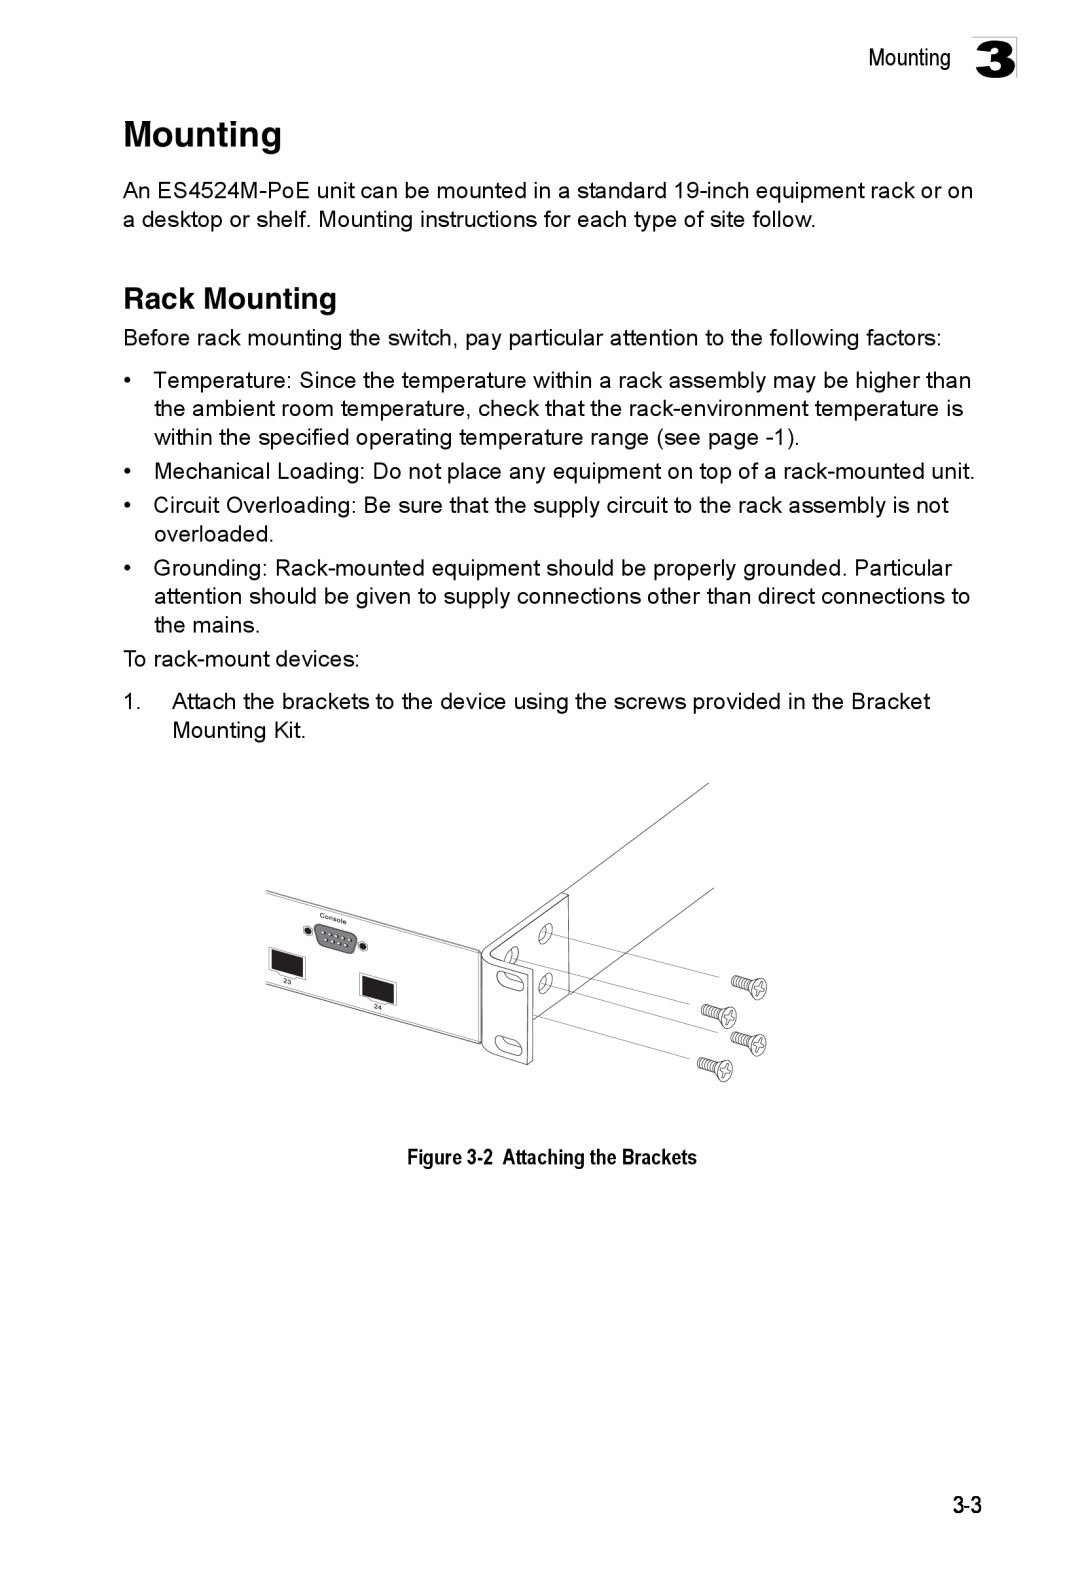 Accton Technology ES4524M-POE manual Rack Mounting, 2 Attaching the Brackets 